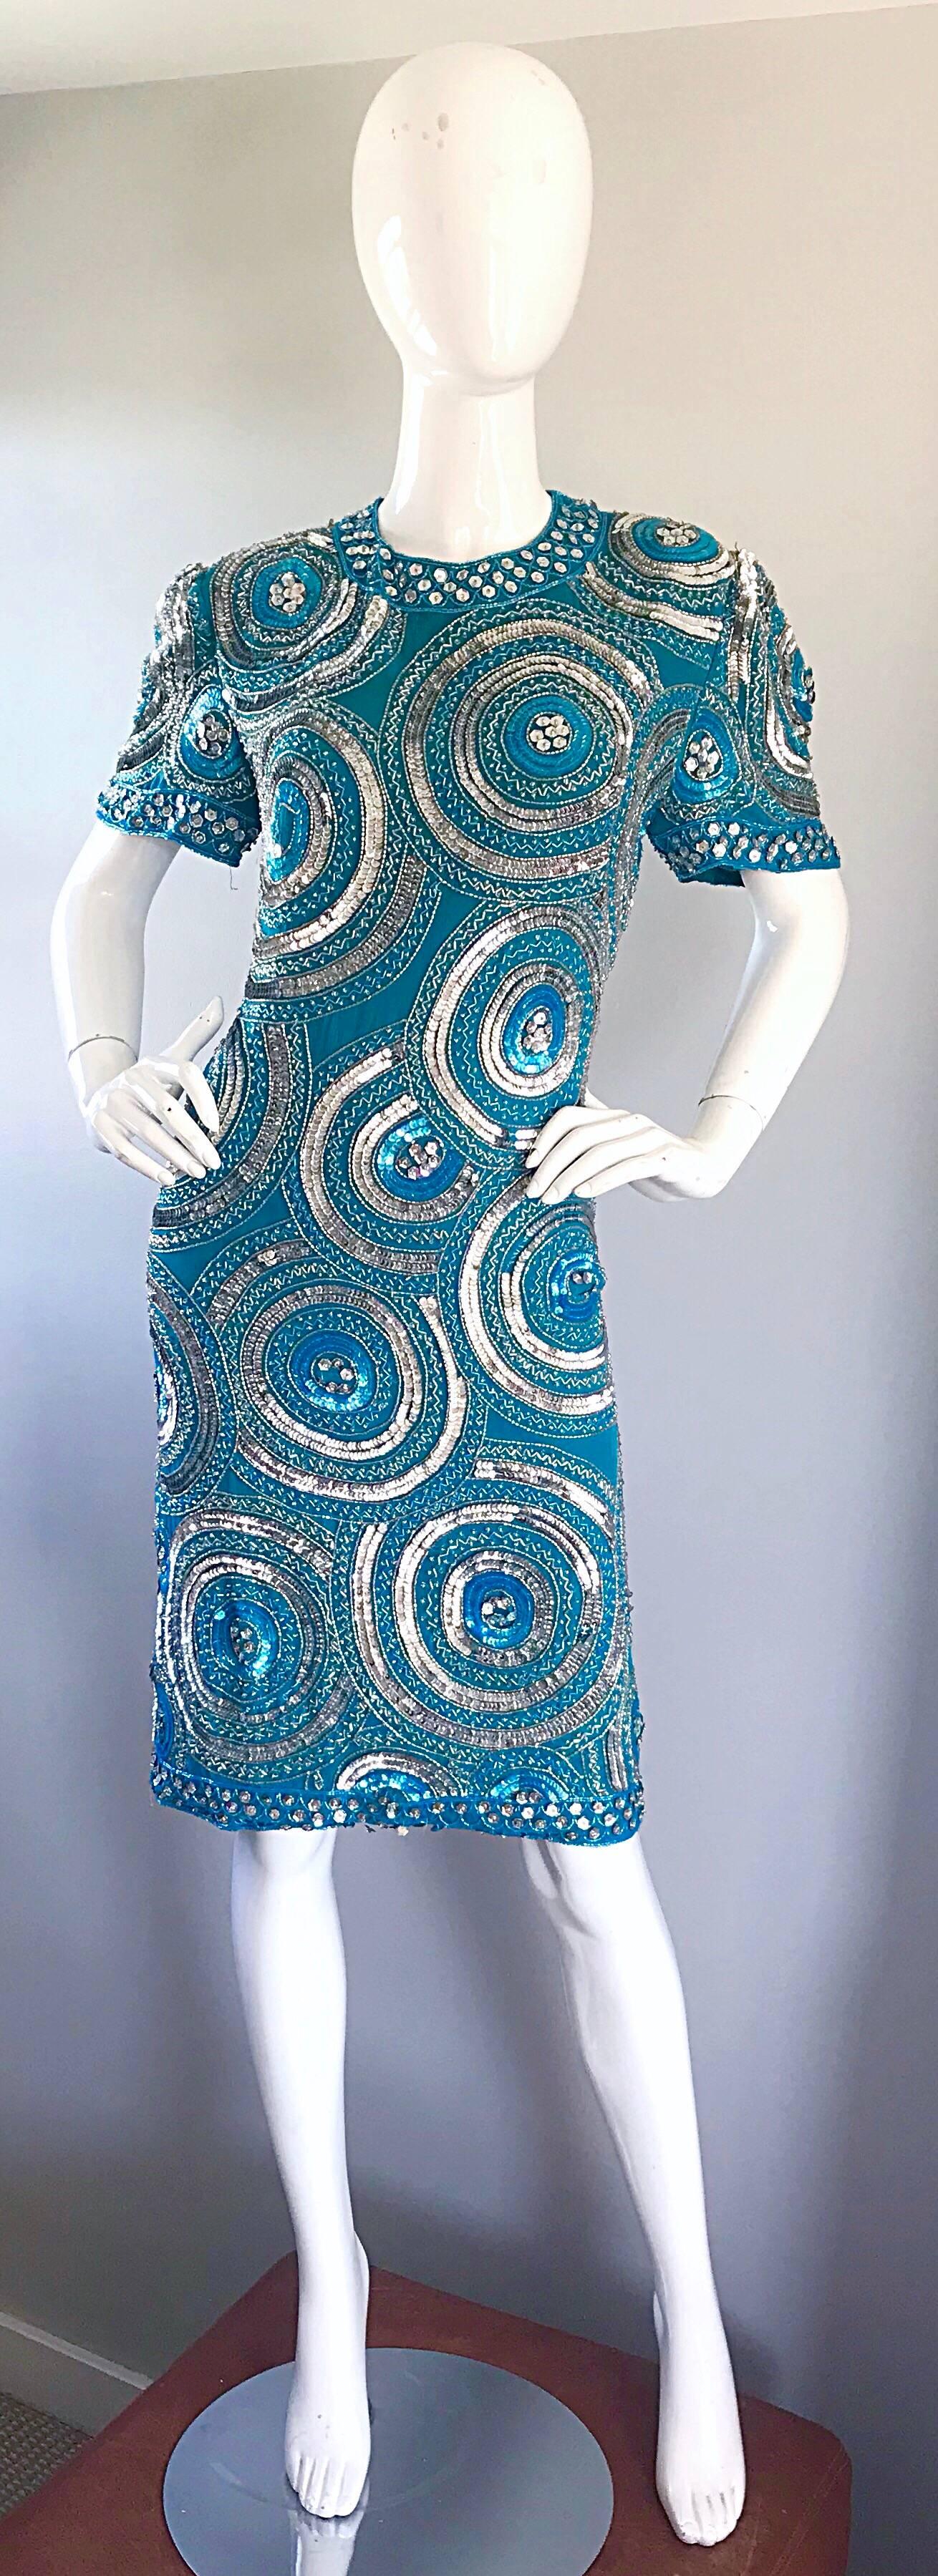 Size 10 / 12 Vintage 1990s Turquoise Blue + Silver Sequined Open Back 90s Dress 6